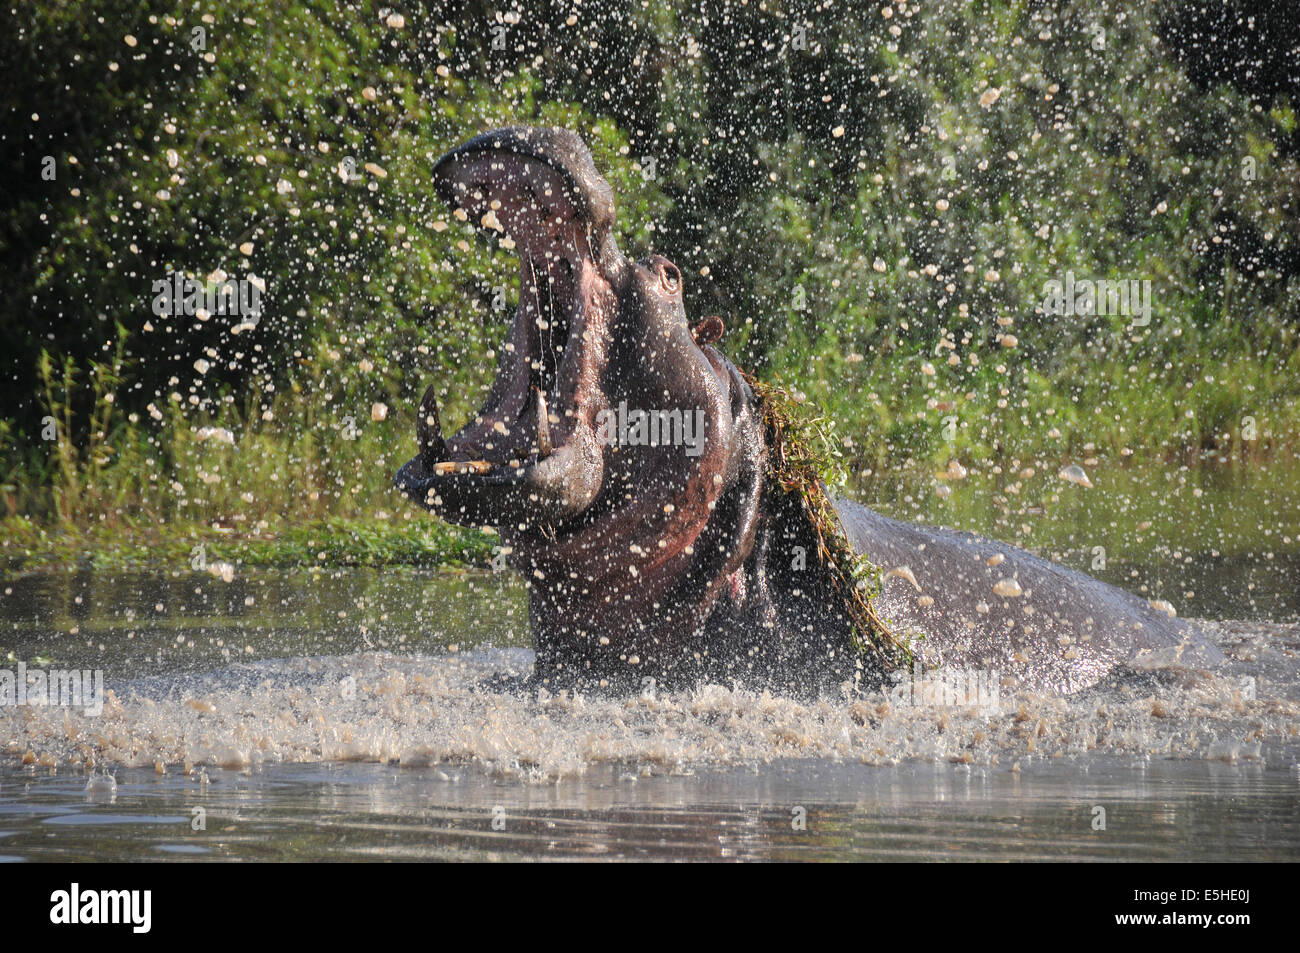 Hippo with a wide open mouth Stock Photo